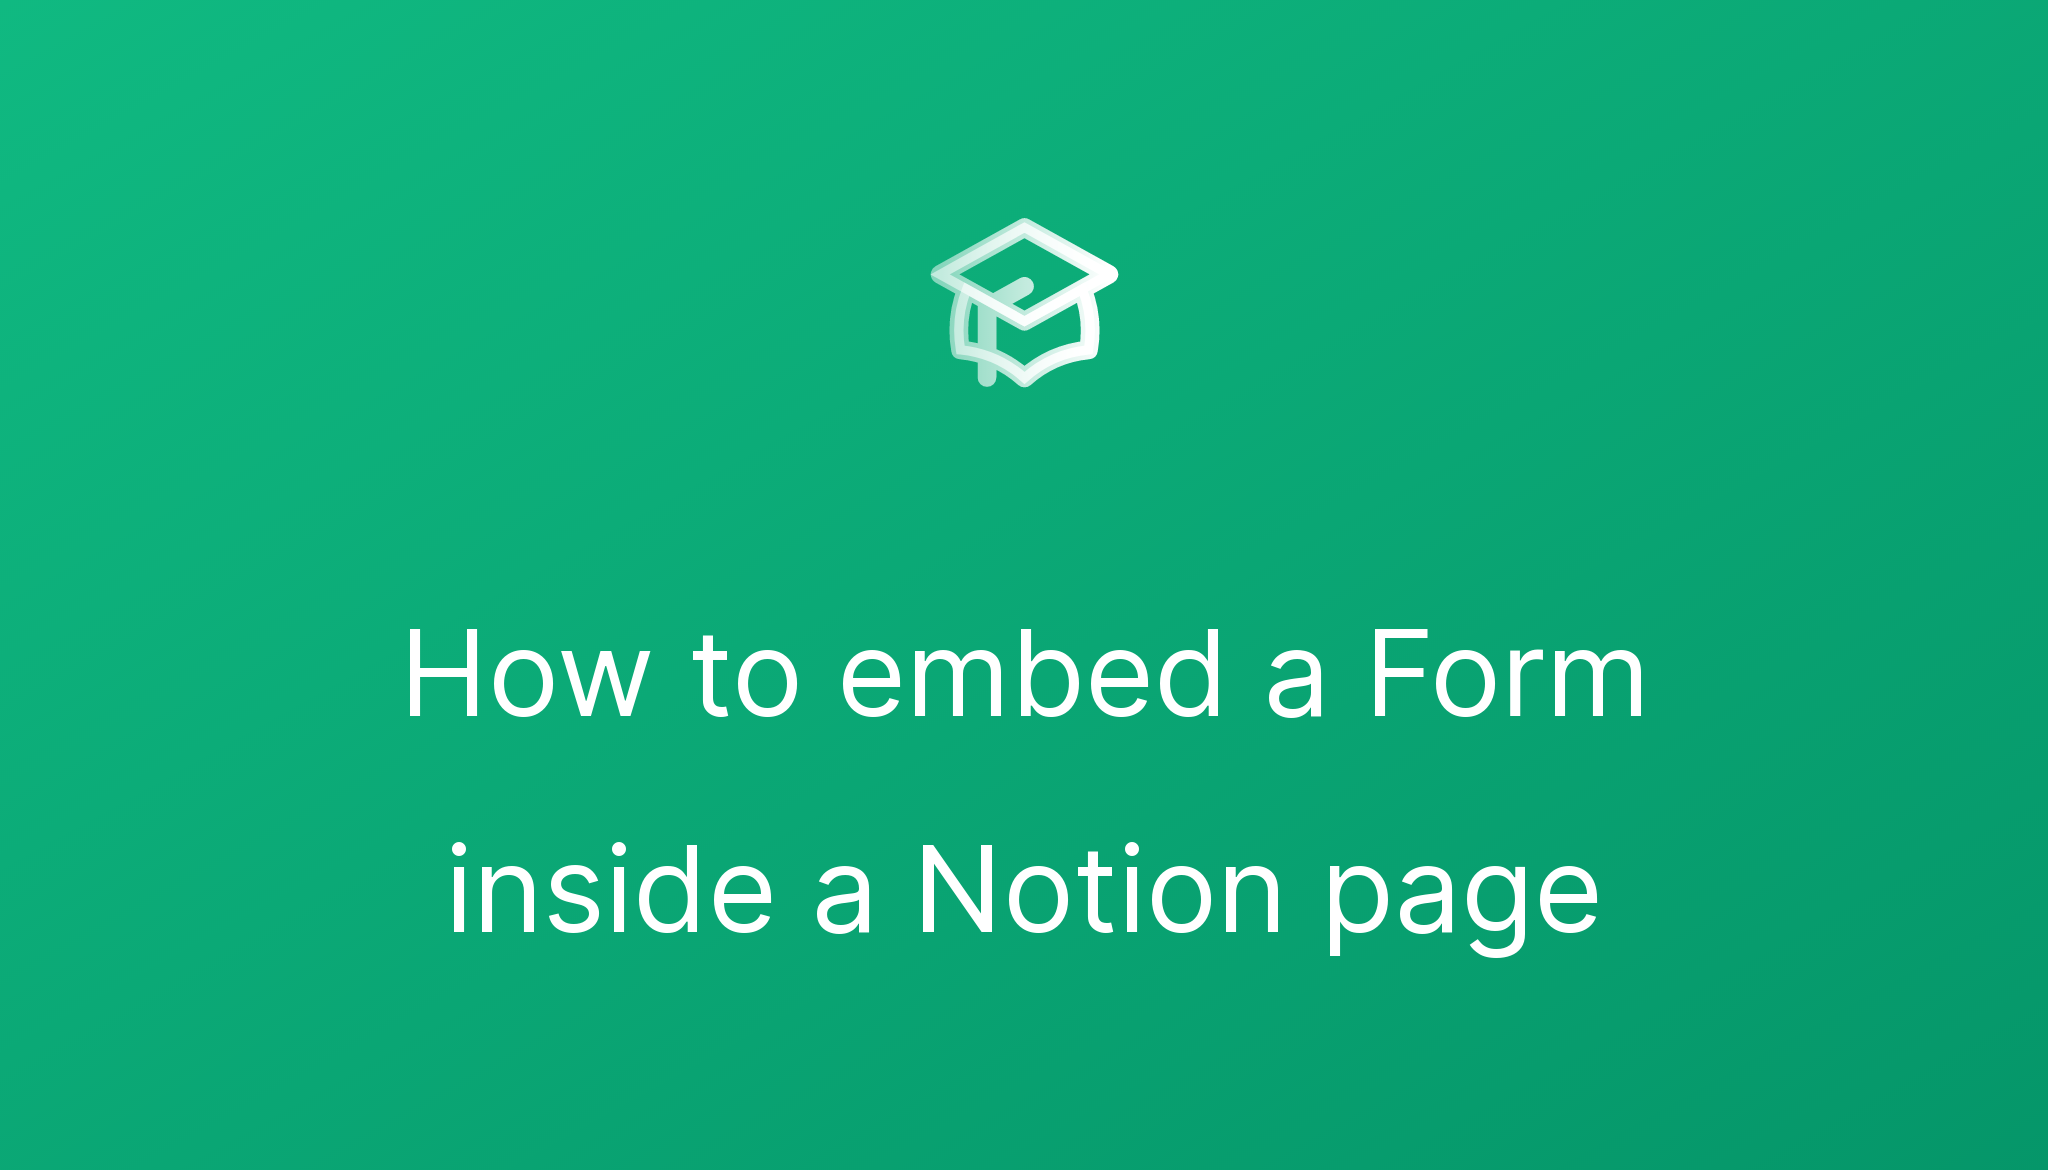 how-to-embed-a-form-inside-a-notion-page-courses-so